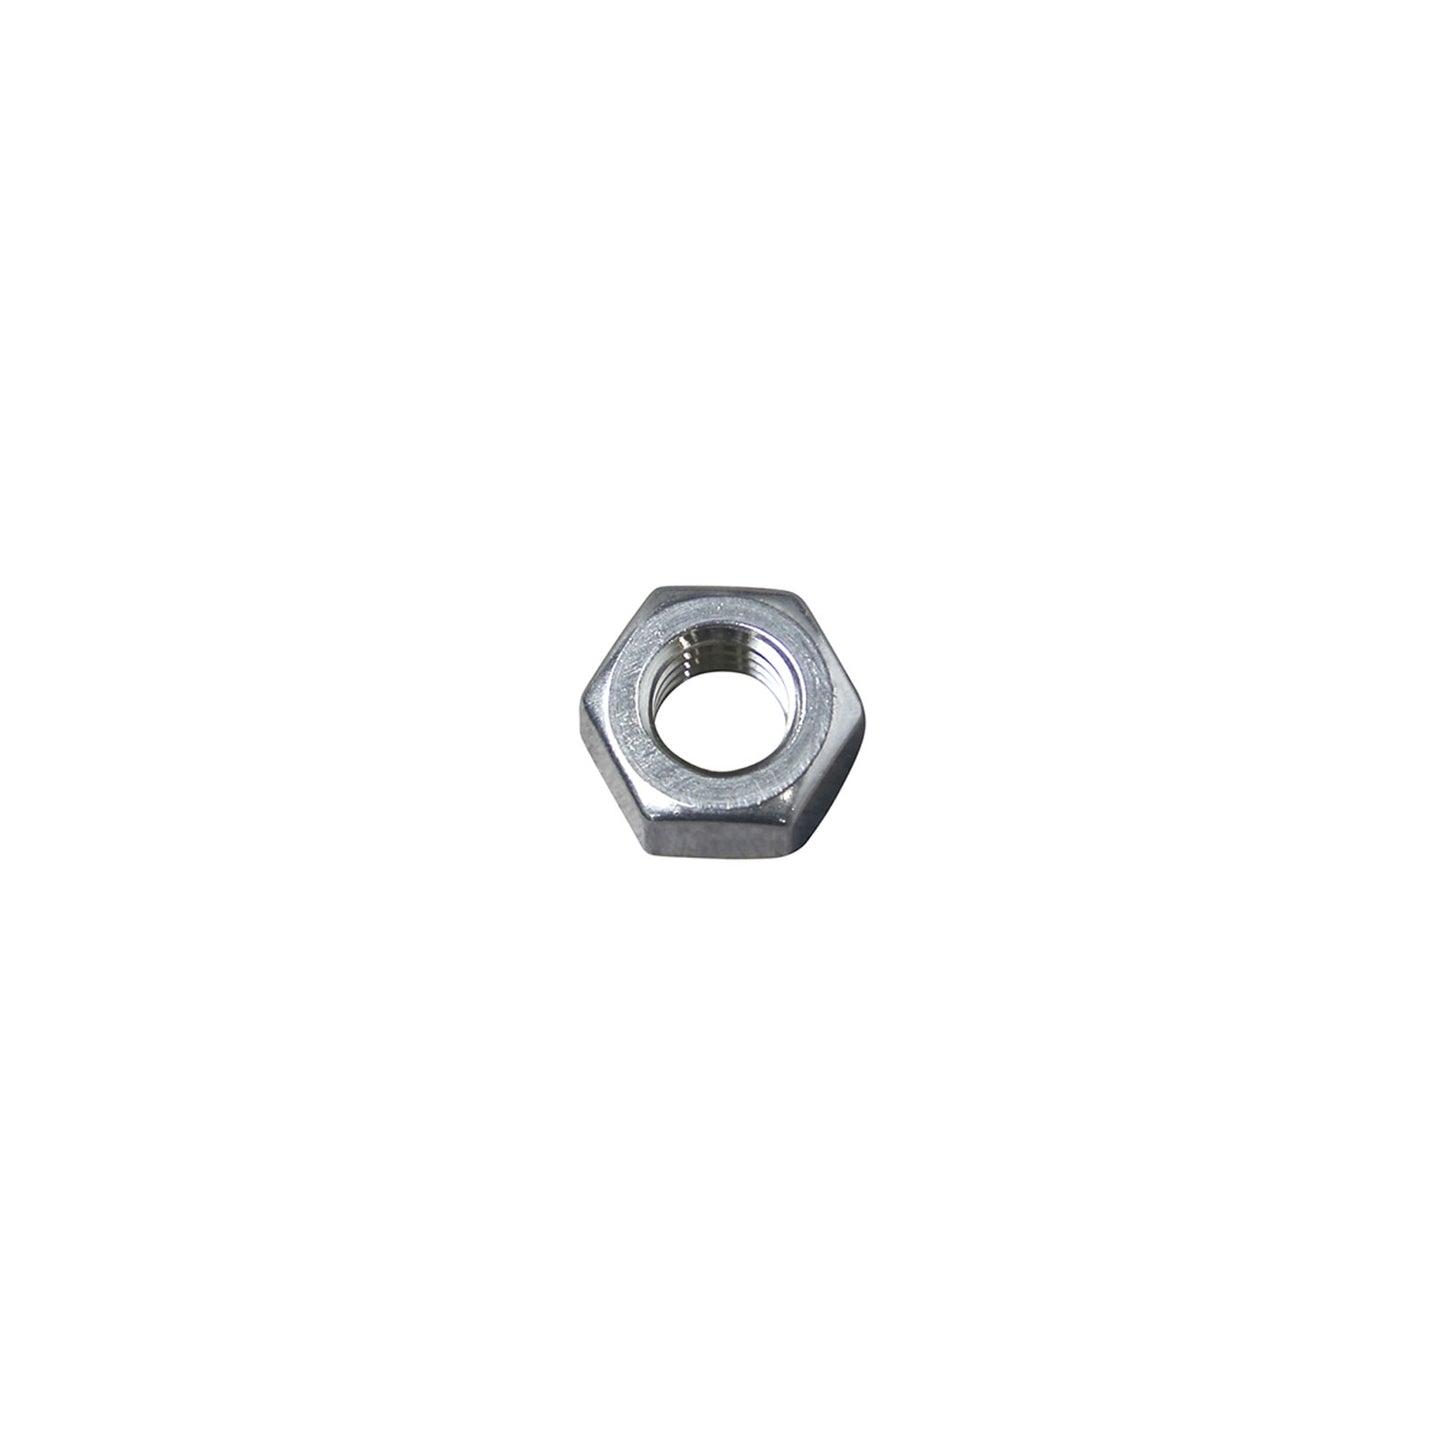 5/16"-18 Conquest Hex Nut - 304 Stainless Steel